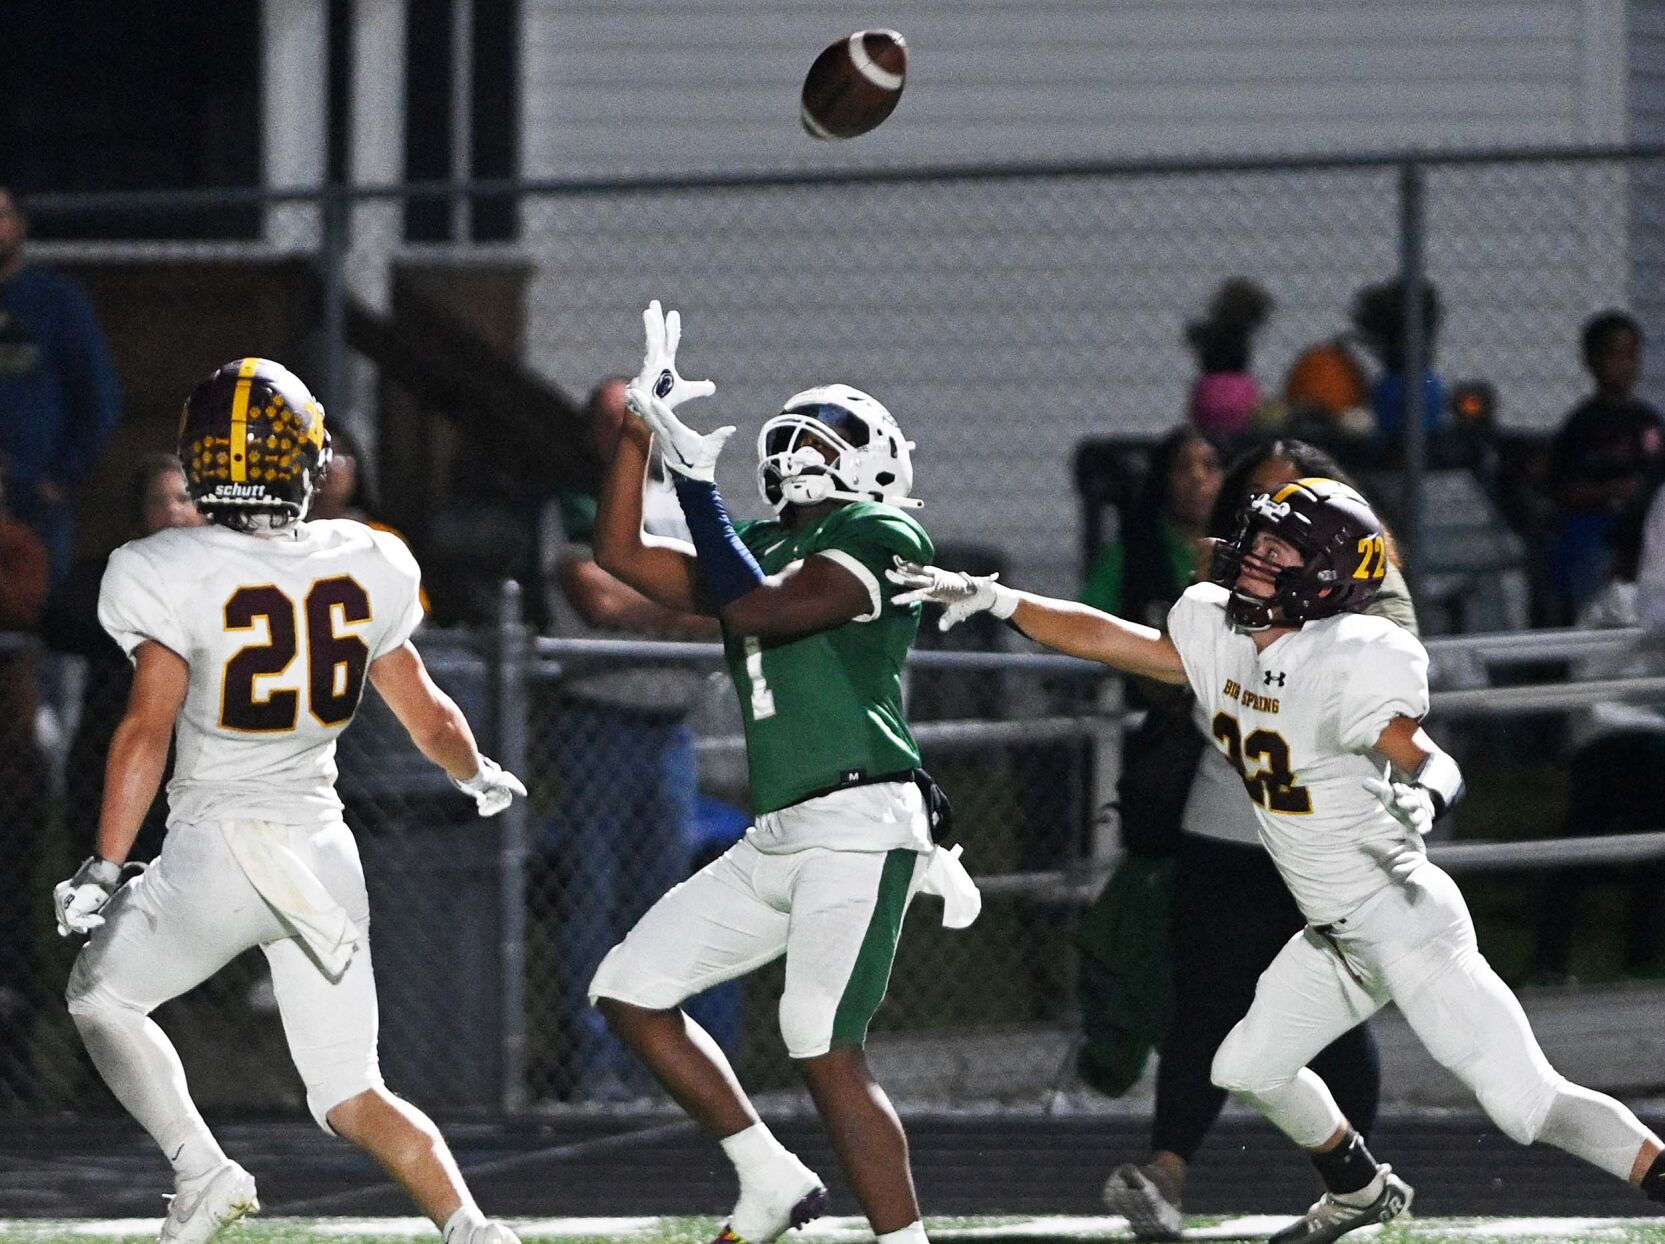 Trinity’s Defense Shines in Victory over Big Spring